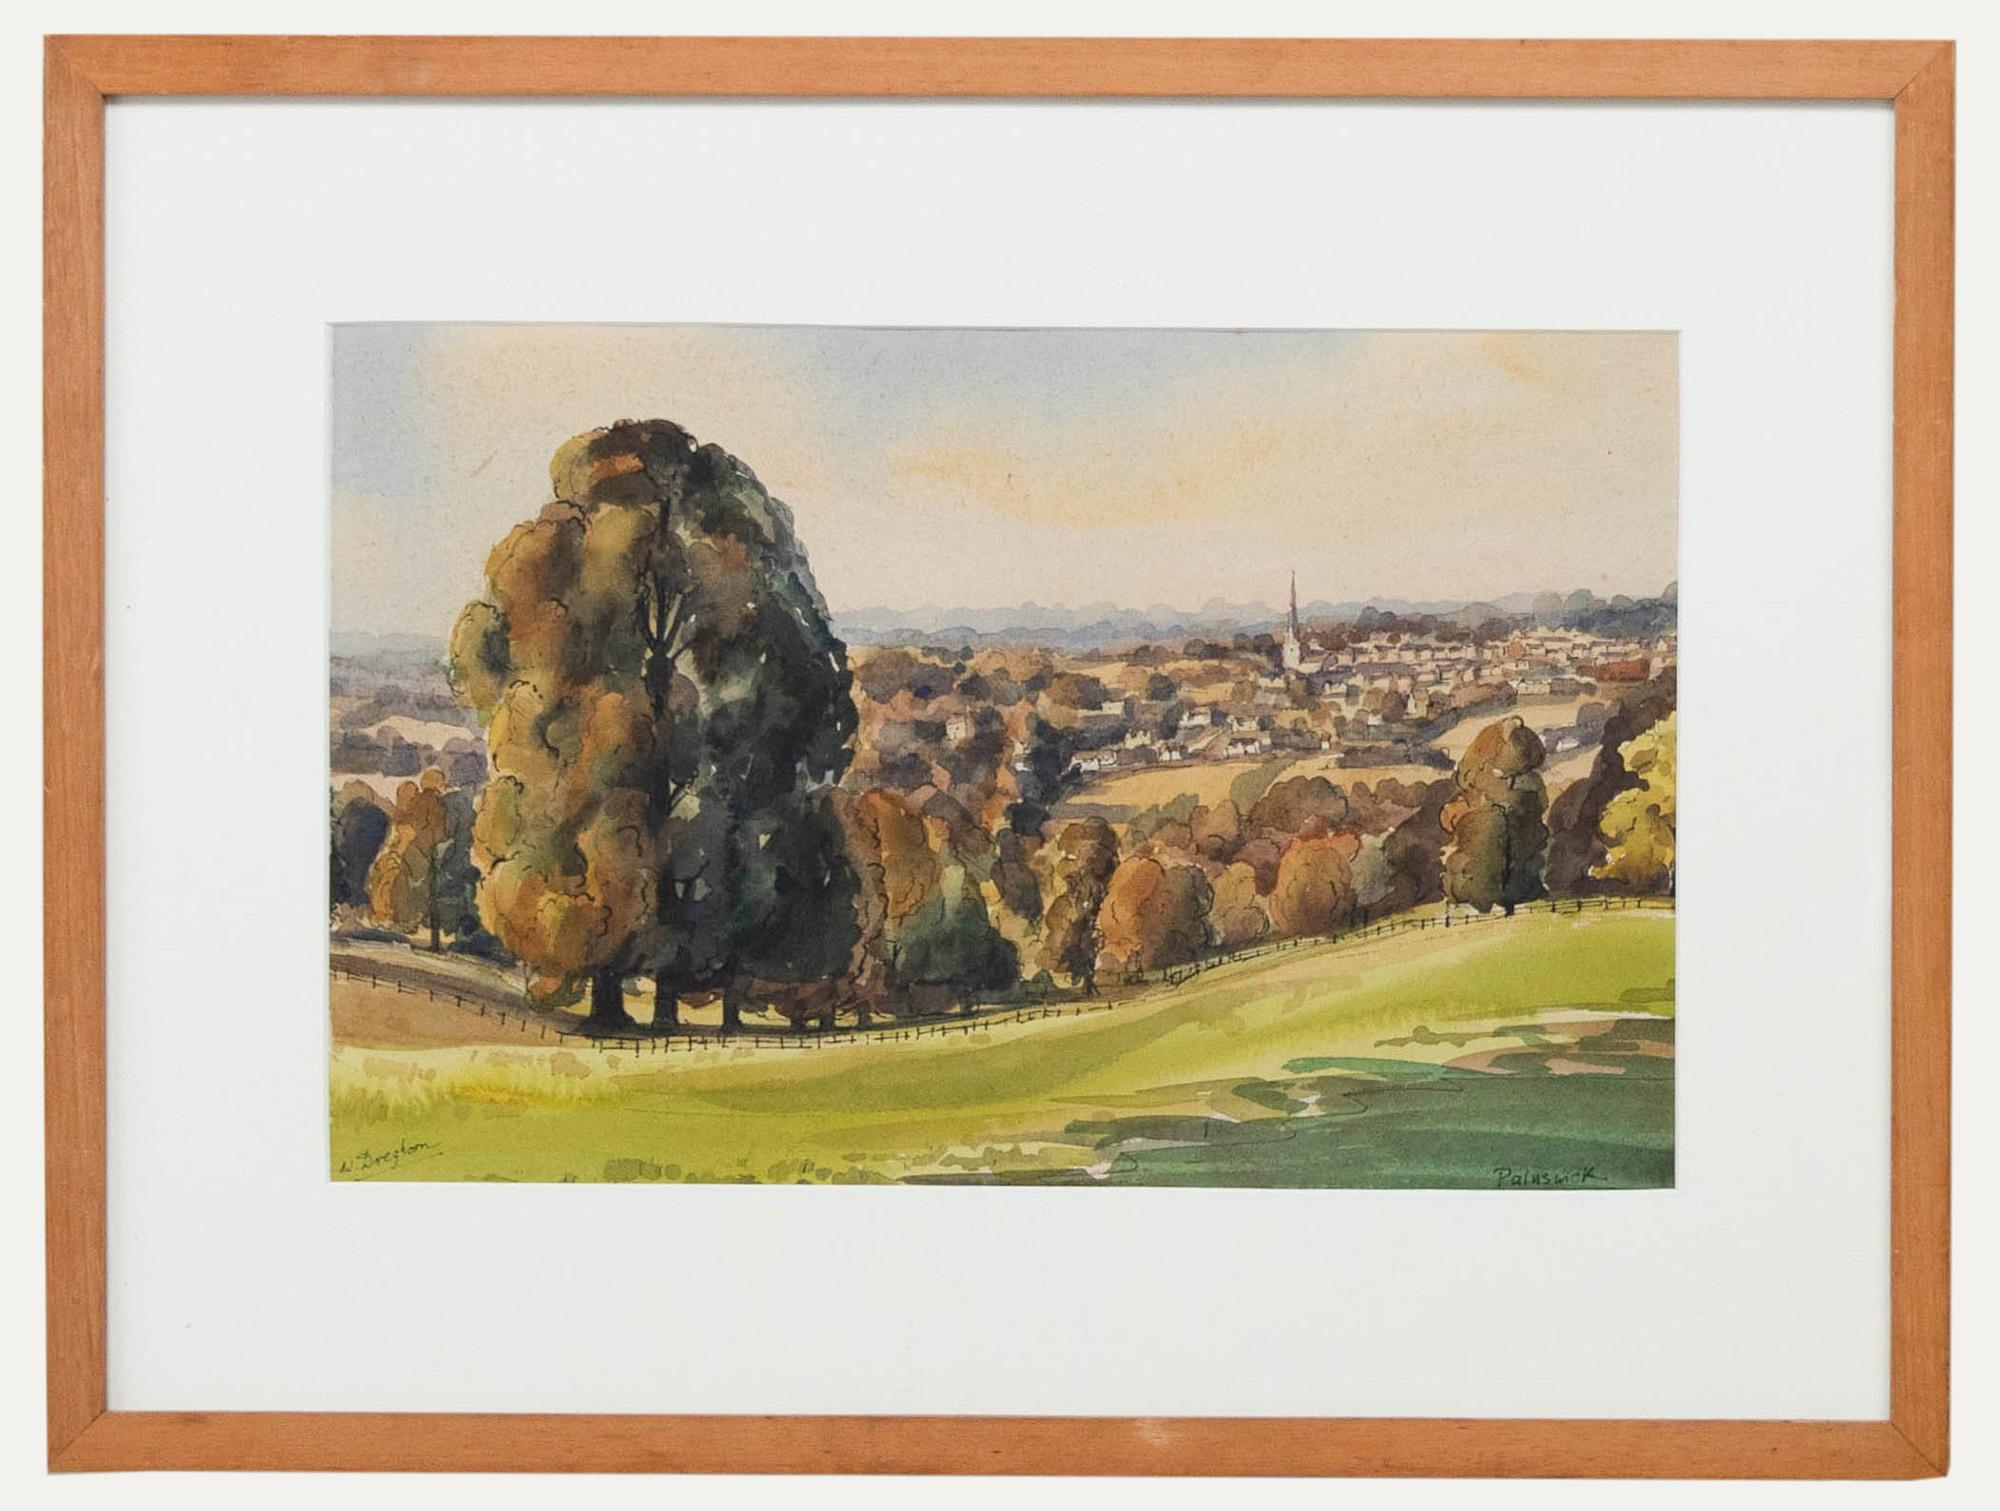 Unknown Landscape Art - William Dreghorn (1908-2001) - Framed Mid 20th Century Watercolour, Painswick